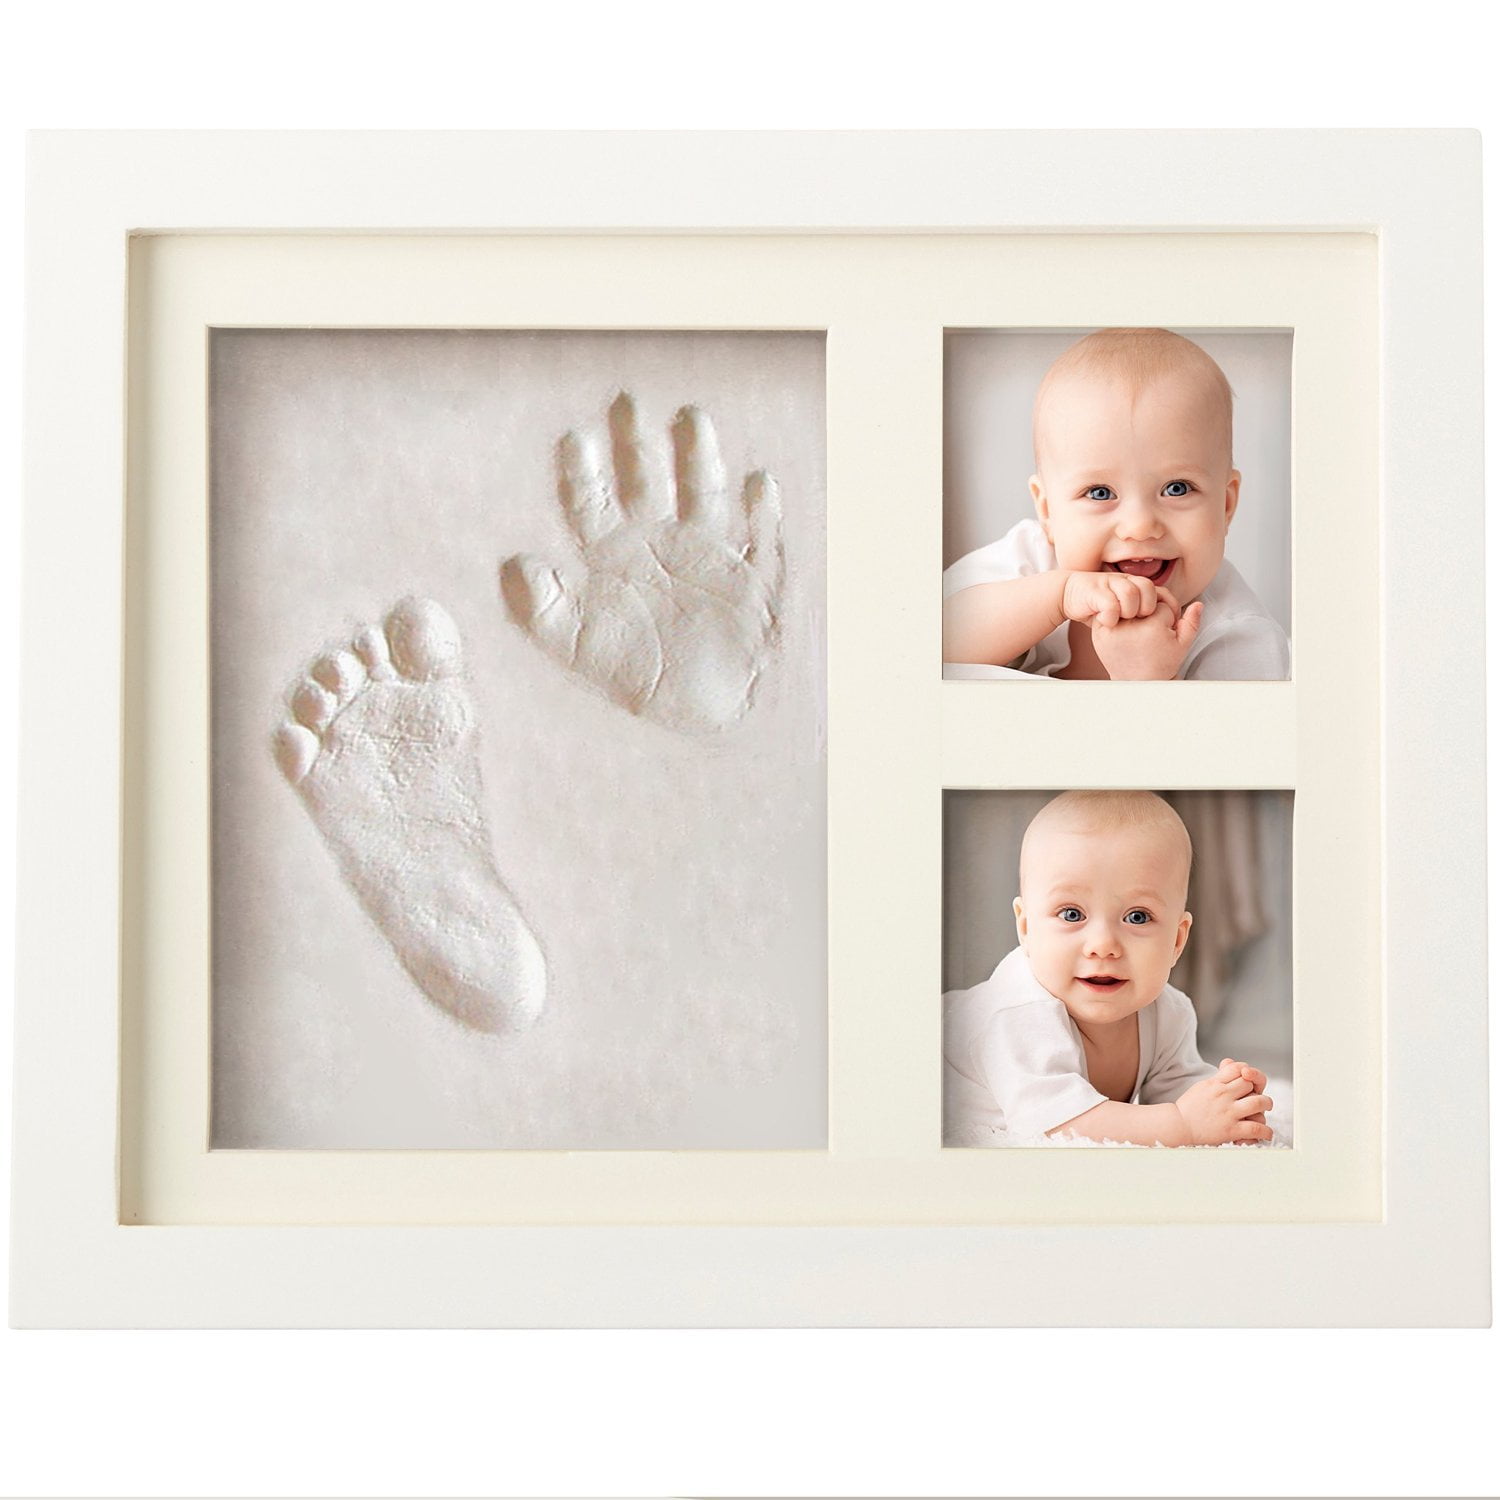 Cute Baby Handprint Kit Footprint Photo Frame for Newborn Boys Girls Great Wall Or Table Baby Picture Frames Personalized Birthday Gift Infant Memorable Keepsake Room Decorations 